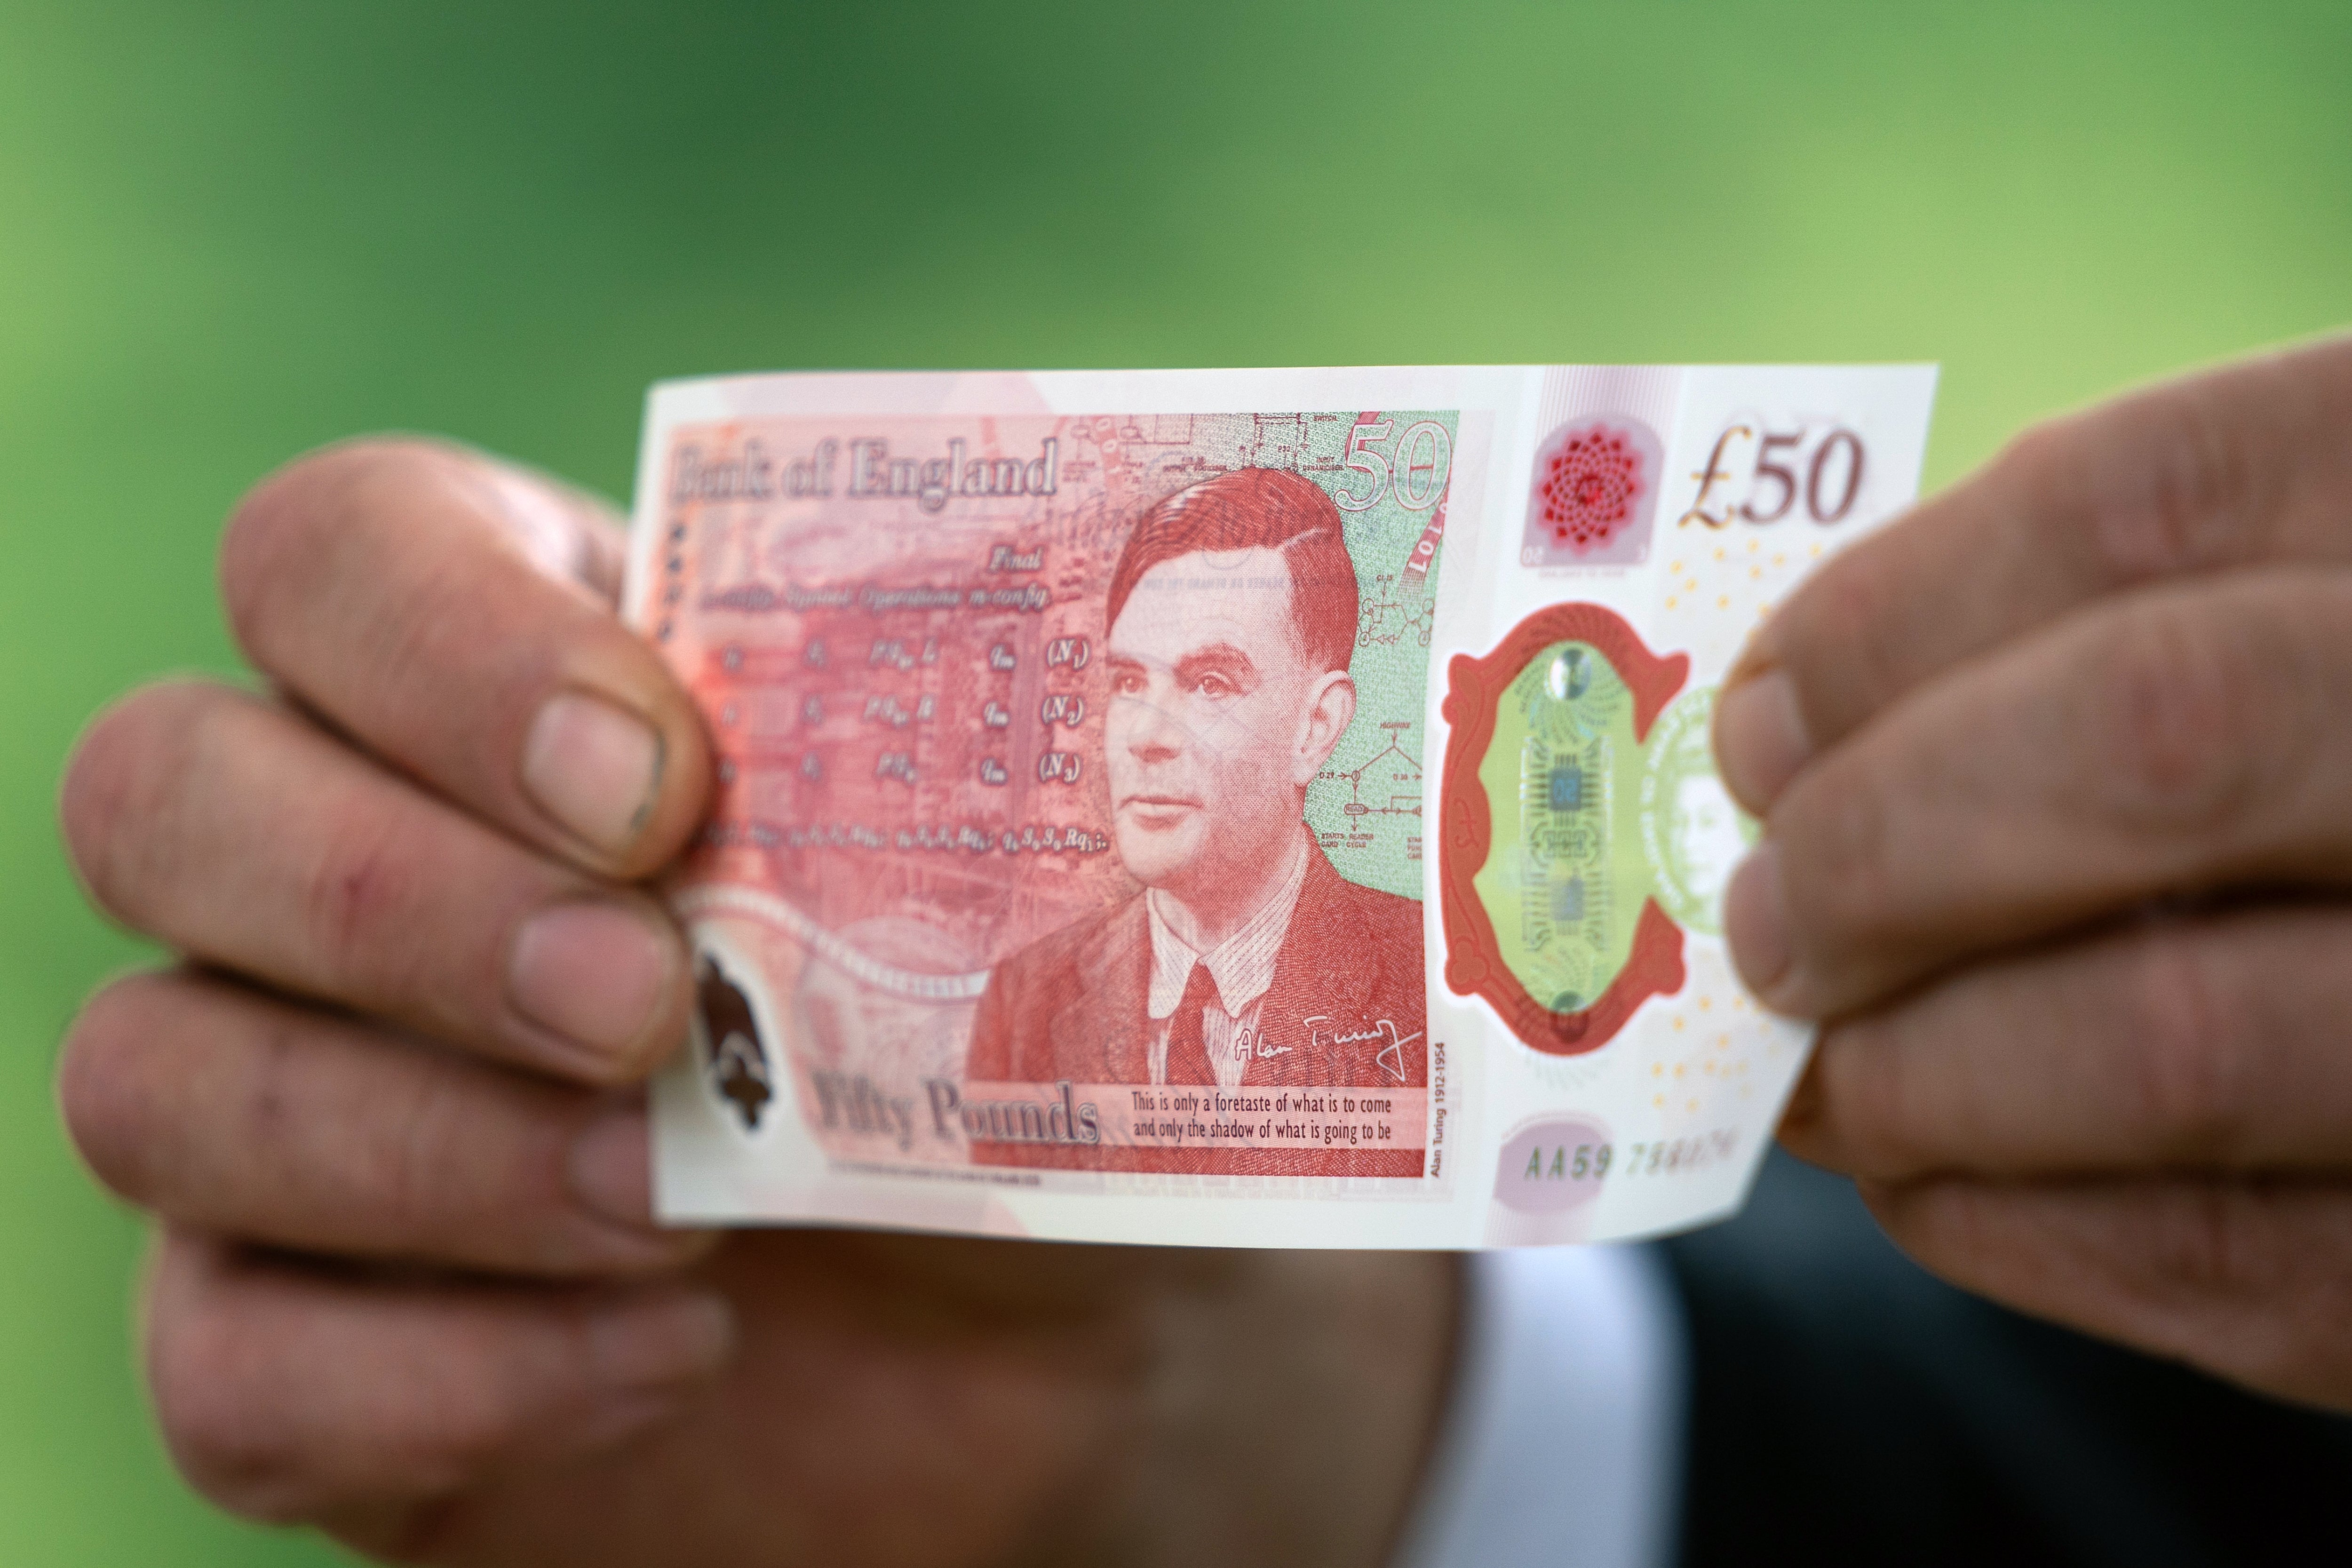 A ?50 banknote featuring Alan Turing is set for release on Wednesday